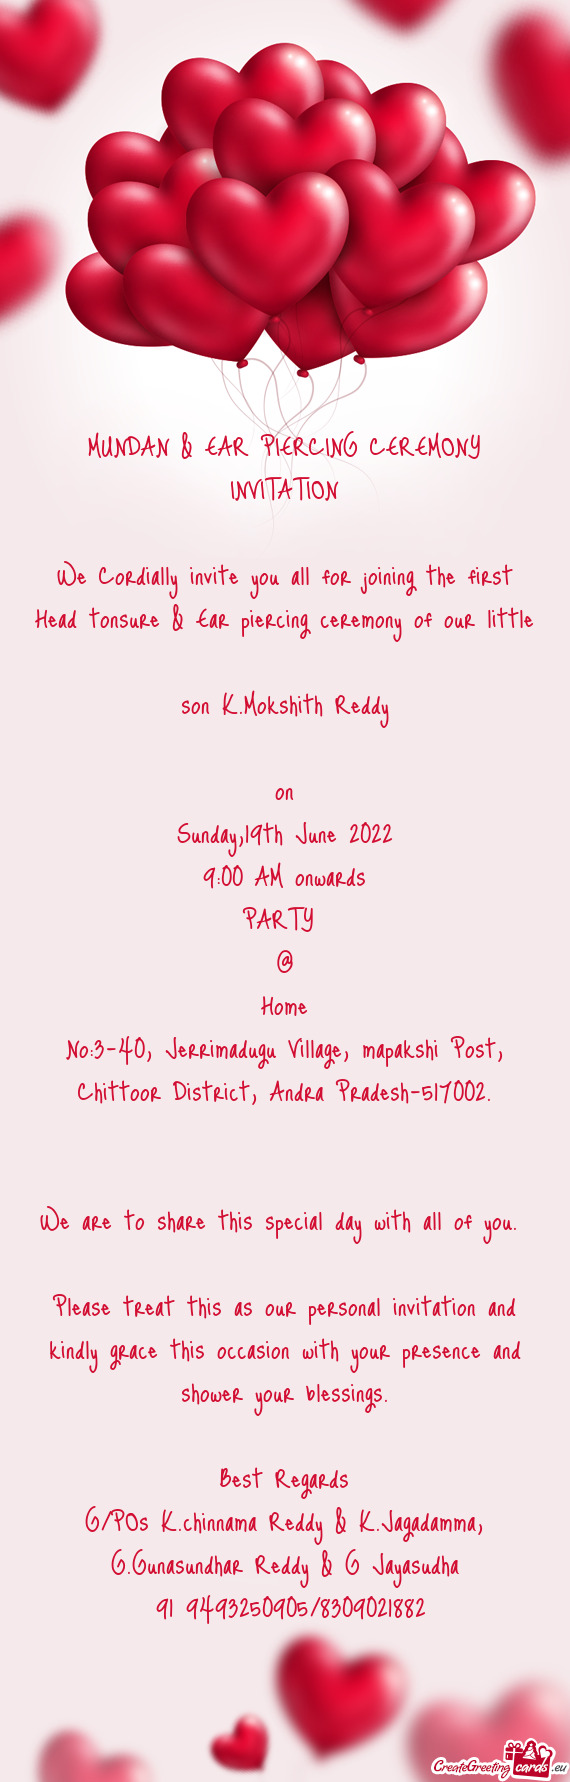 MUNDAN & EAR PIERCING CEREMONY INVITATION We Cordially invite you all for joining the first Head